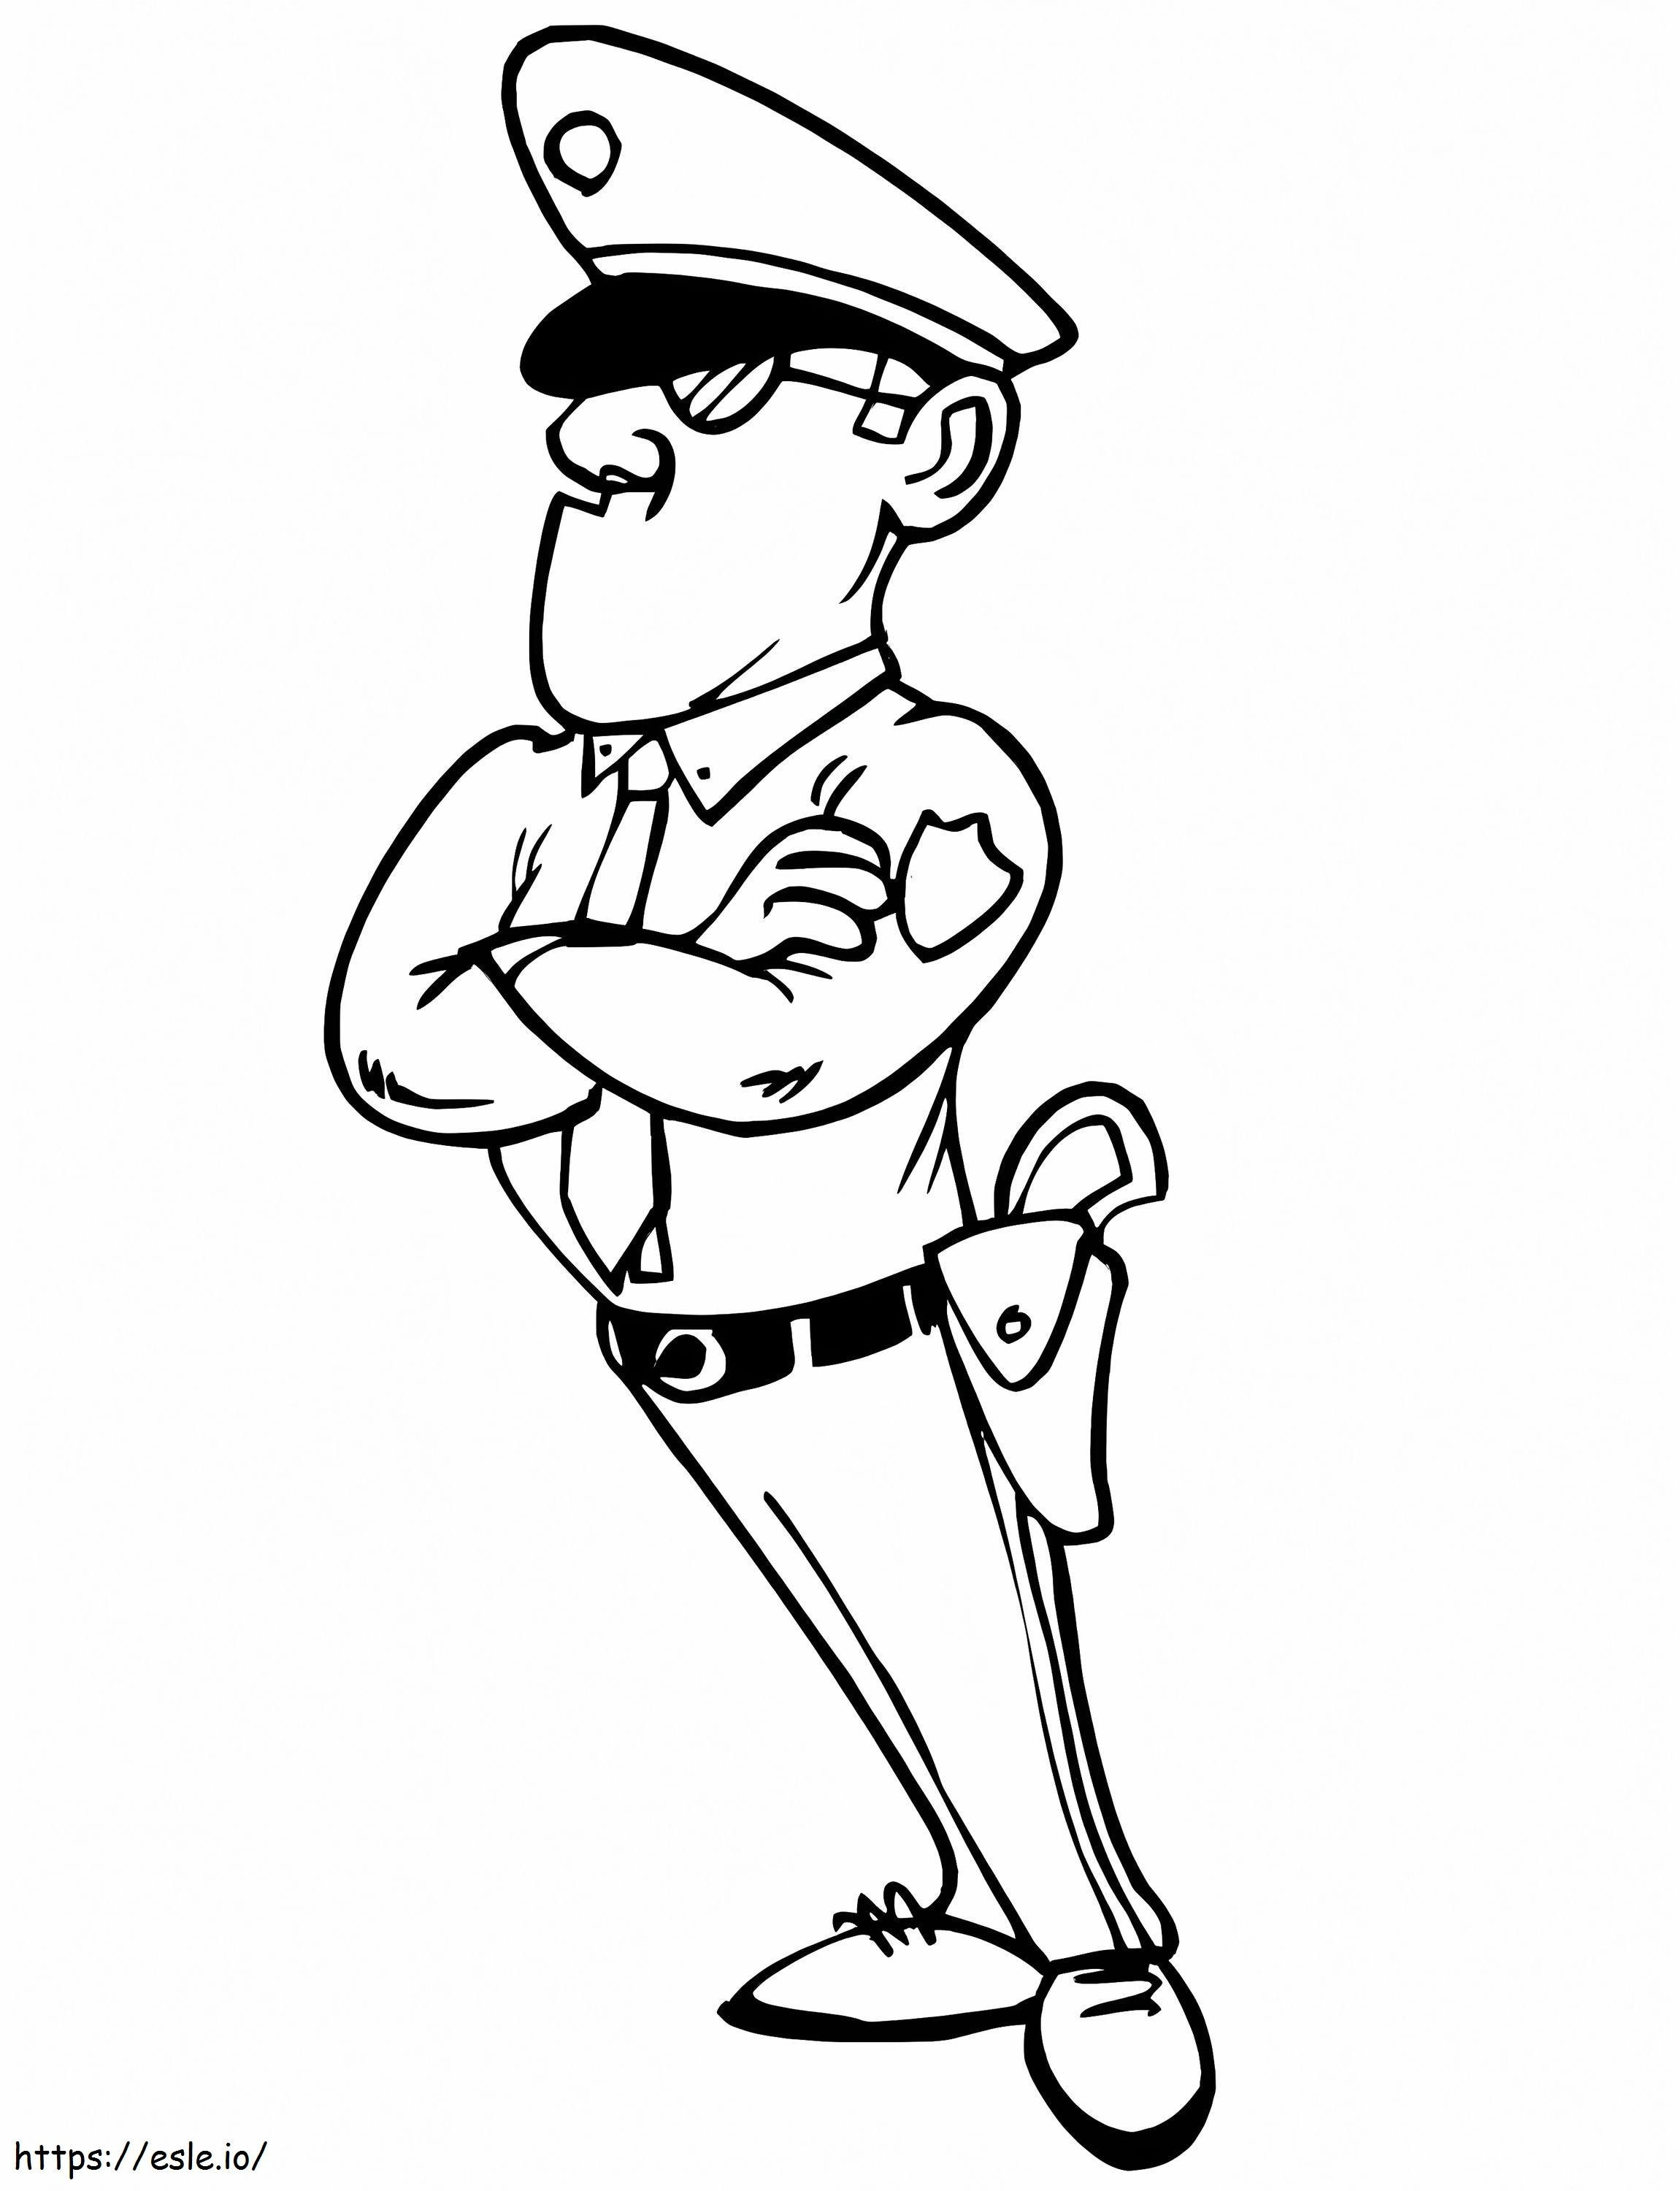 Great Police coloring page